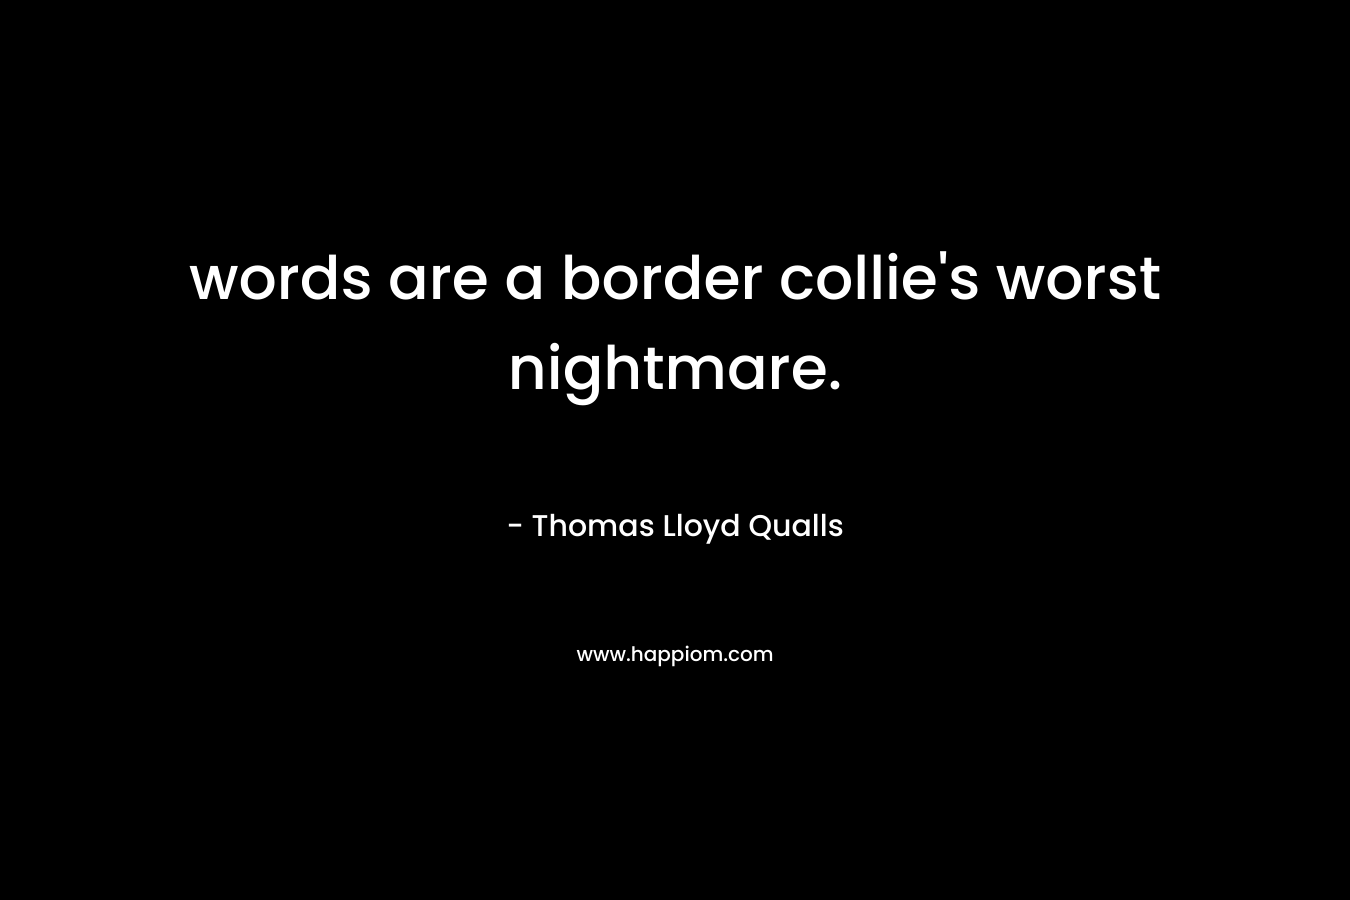 words are a border collie’s worst nightmare. – Thomas Lloyd Qualls